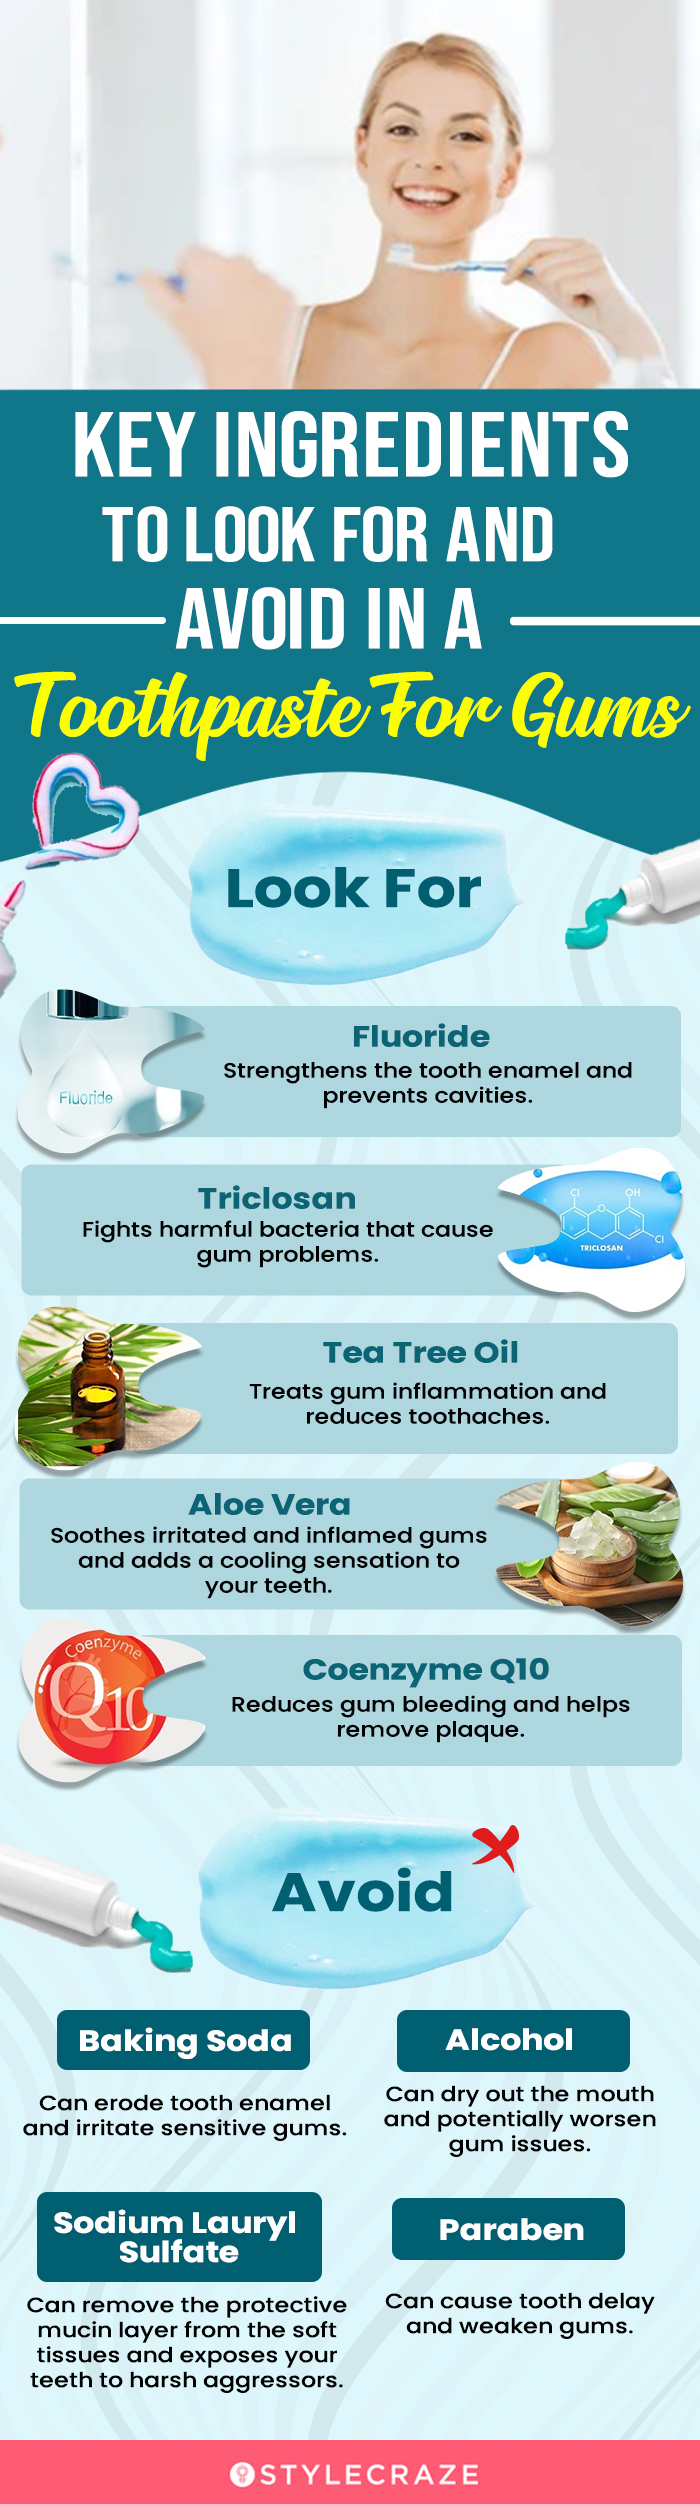 Key Ingredients To Look For And Avoid In A Toothpaste For Gums (infographic)